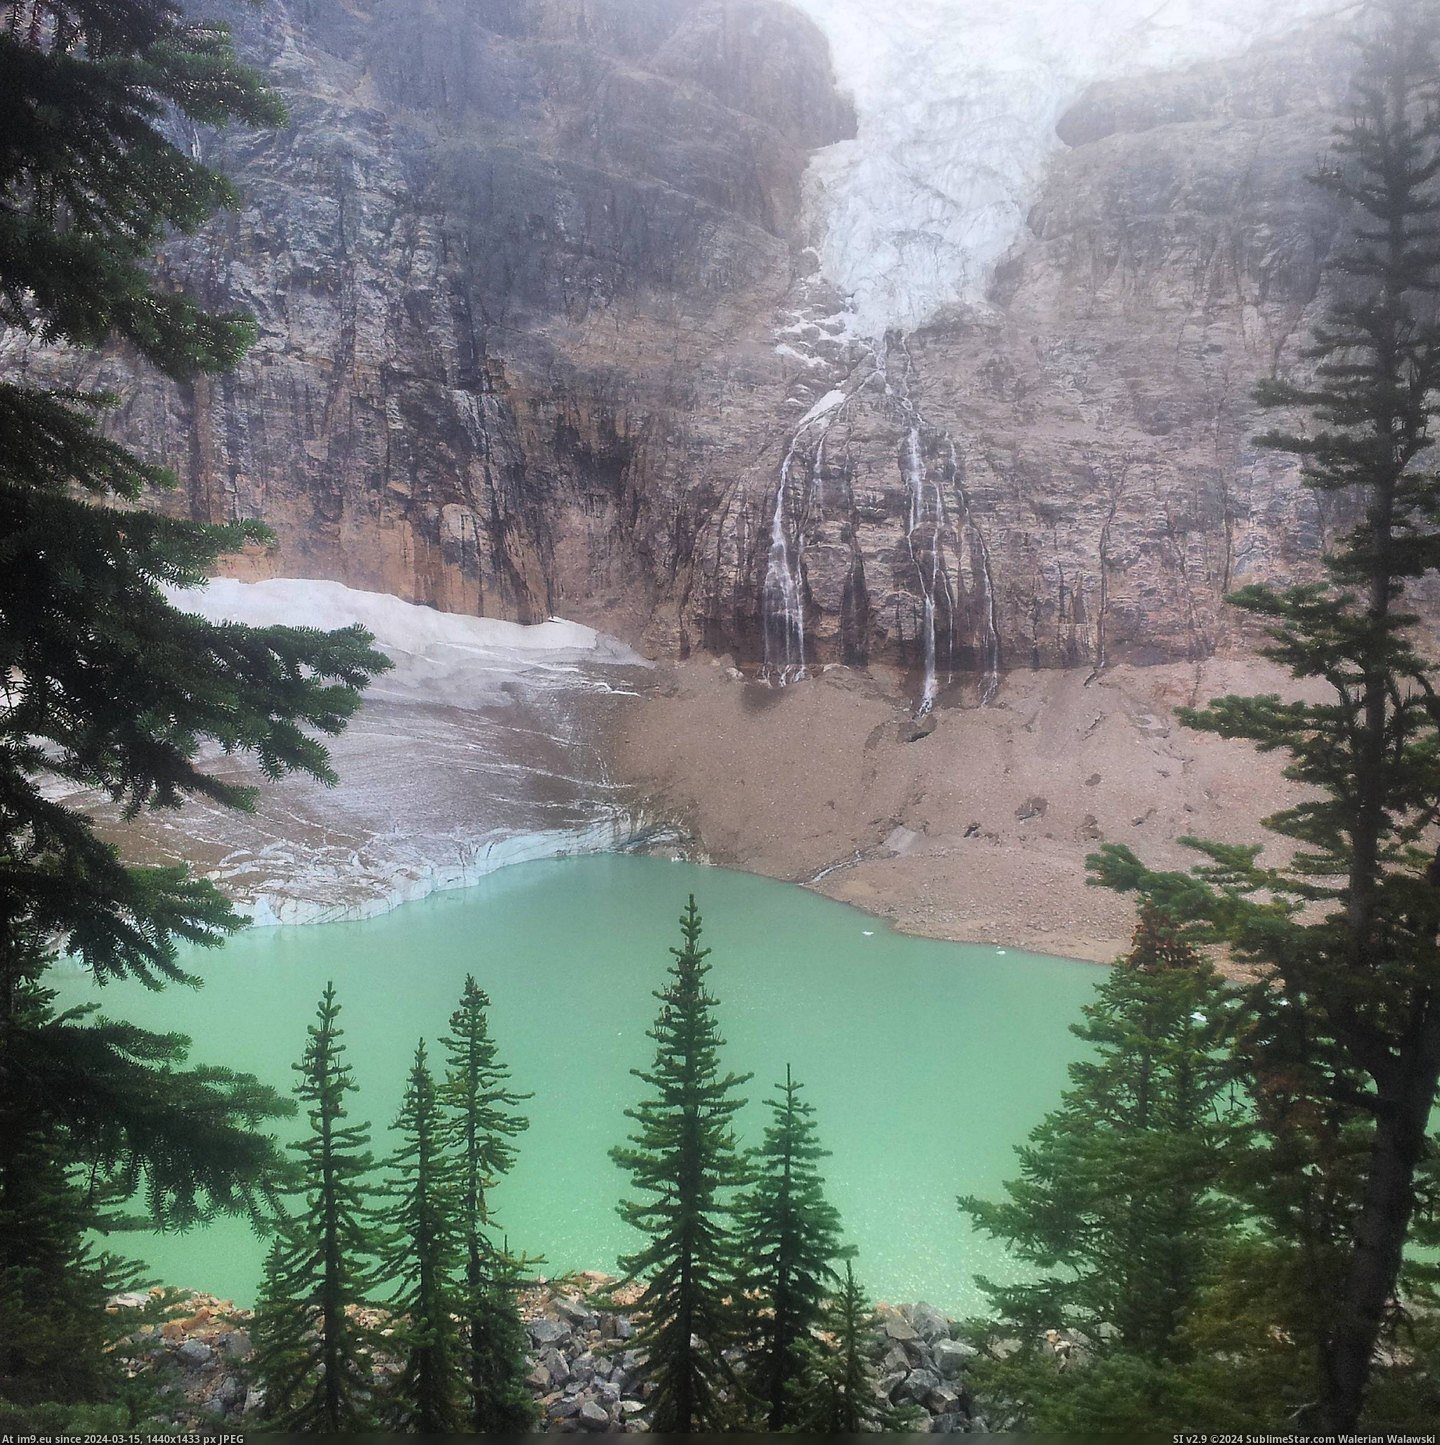 #Park #National #Angel #Quality #Highly #Crappy #Recommend #Seein #Glacier #Excuse #Jasper #2448x2448 [Earthporn] [2448x2448] Excuse the crappy quality. This is Angel Glacier in Jasper National Park, I would highly recommend seein Pic. (Image of album My r/EARTHPORN favs))